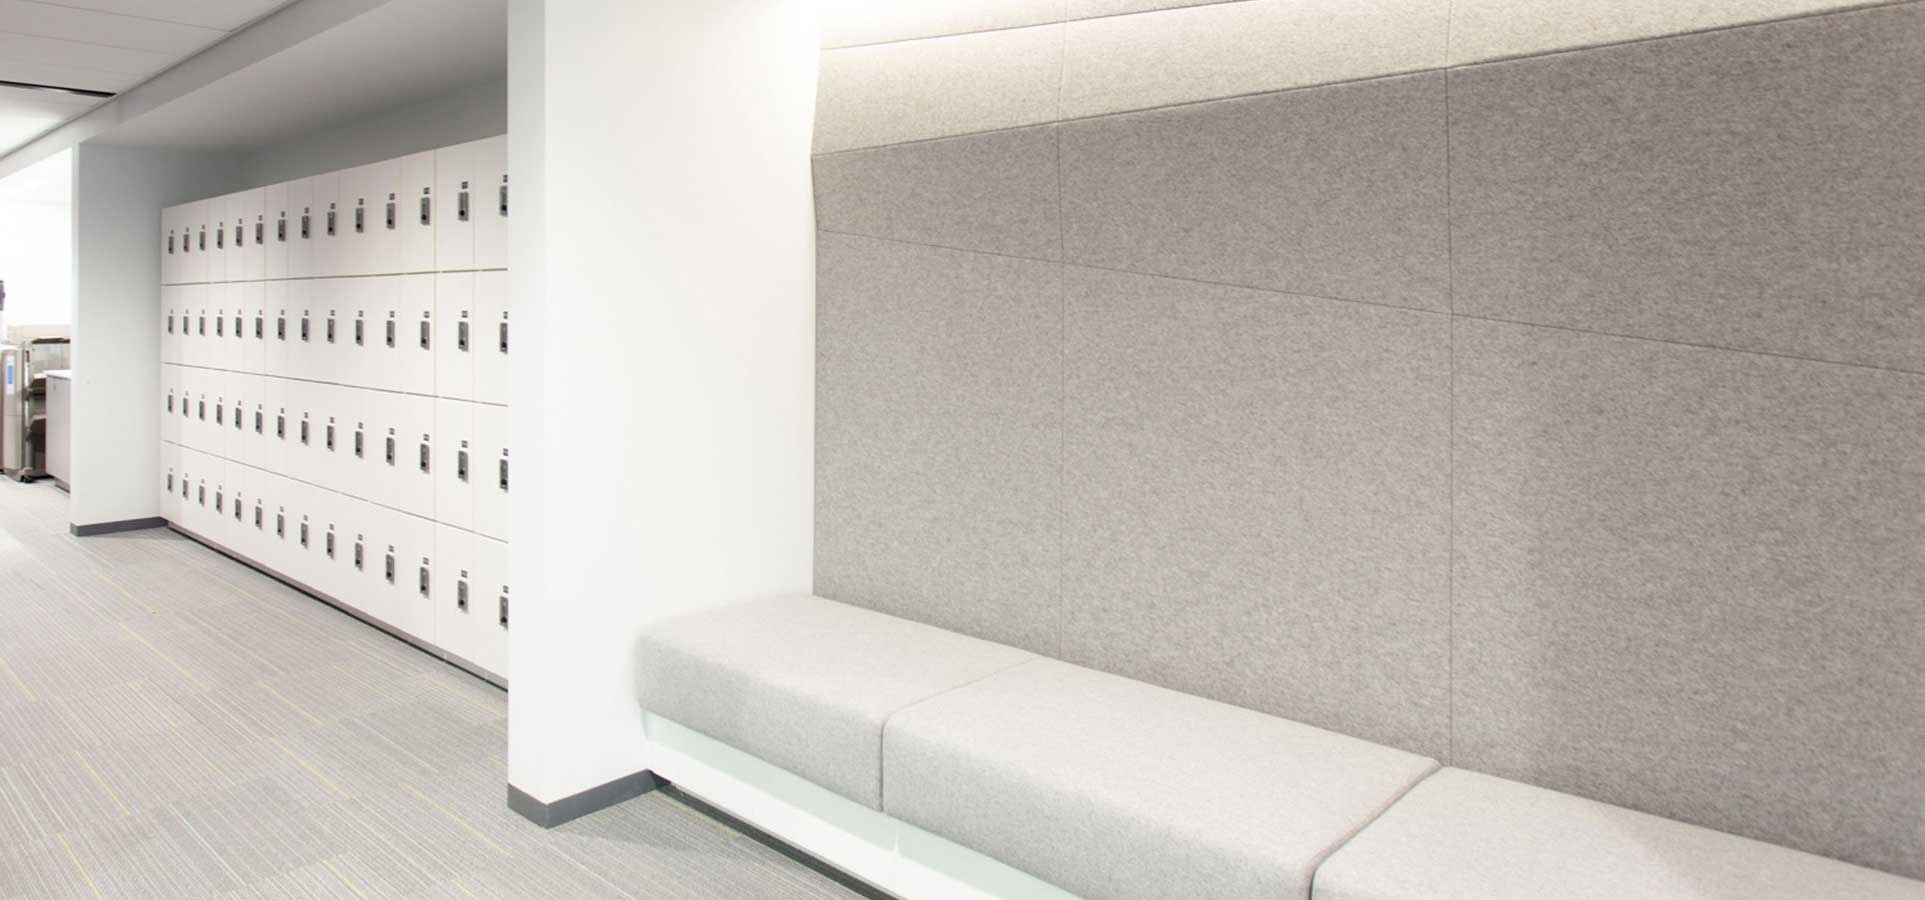 Wall of day use lockers in a hallway next to a padded bench